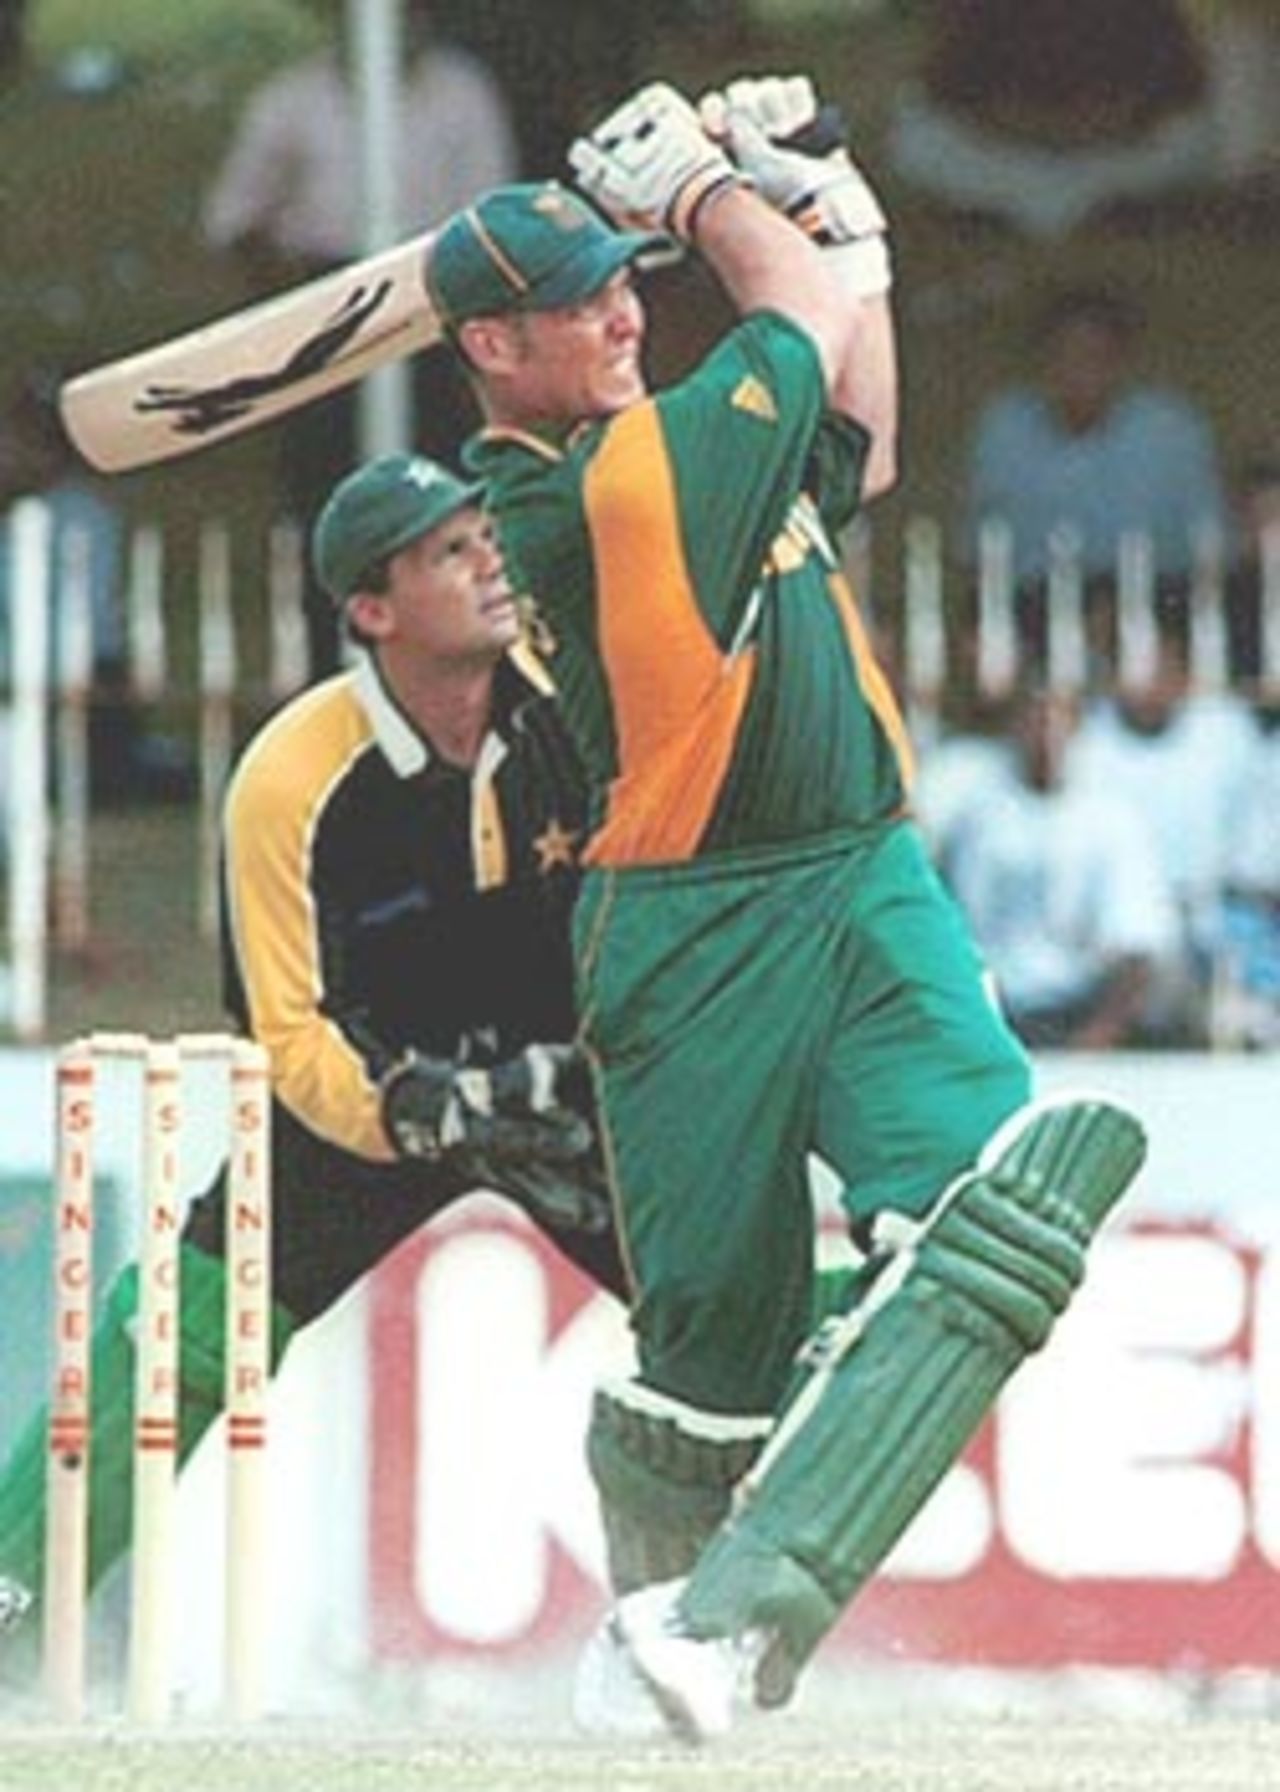 Kallis in an aggresive mood against Pakistan, Singer Triangular Series, 2000/01, 6th Match, Pakistan v South Africa, Sinhalese Sports Club Ground, Colombo, 12 July 2000.